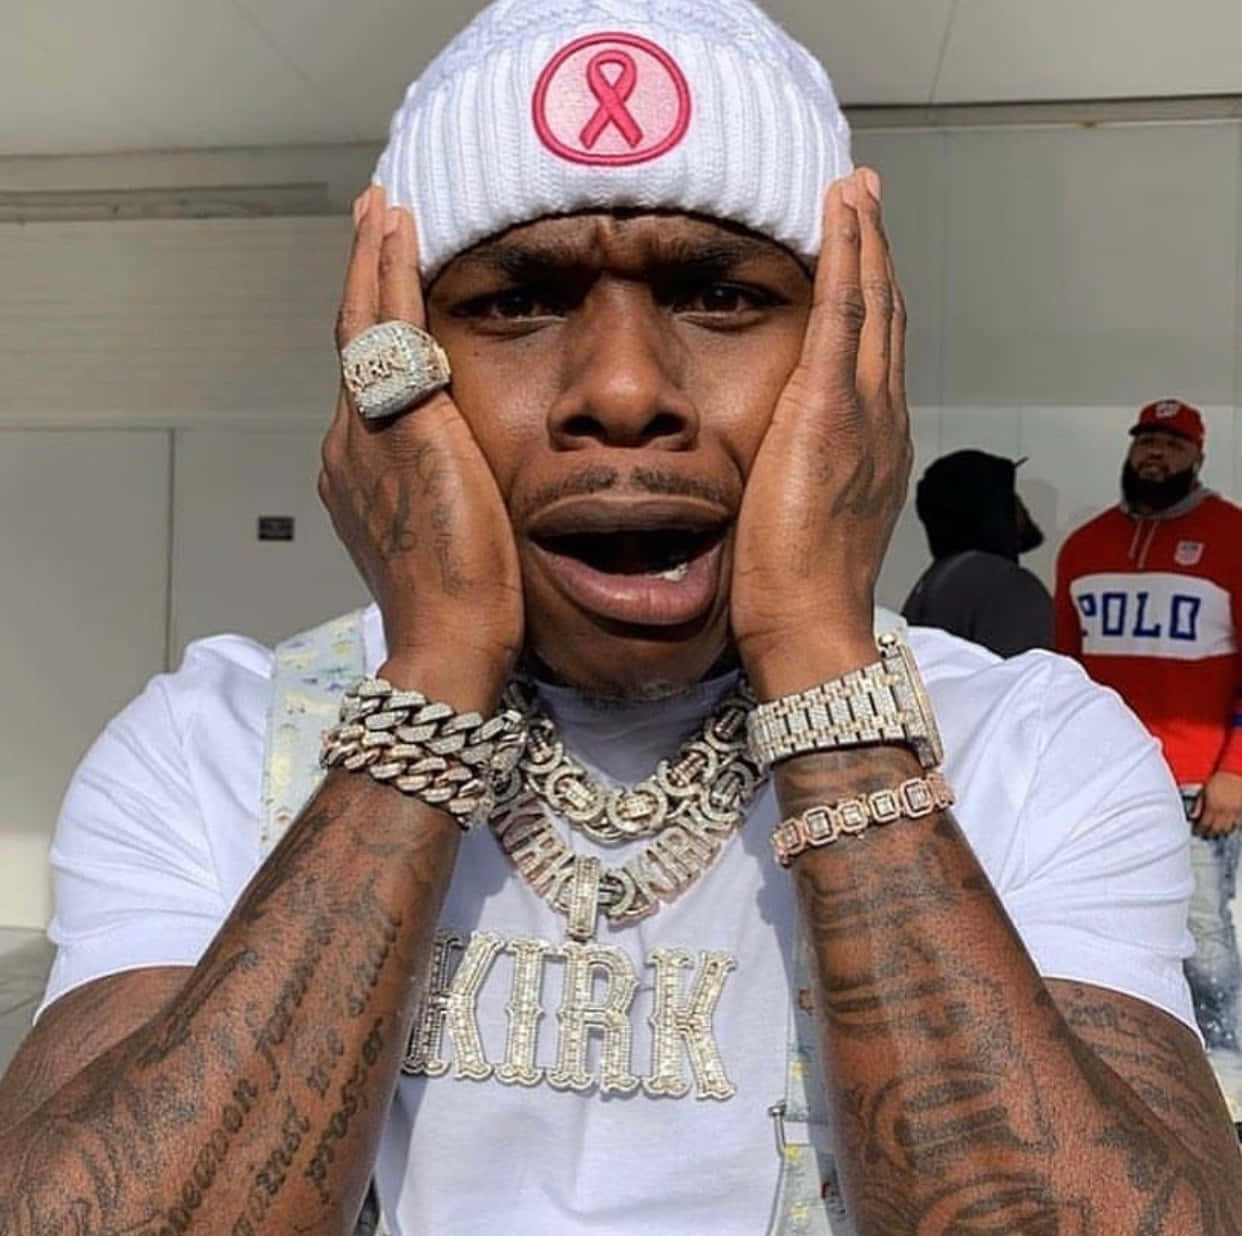 Rapper DaBaby performing live on stage